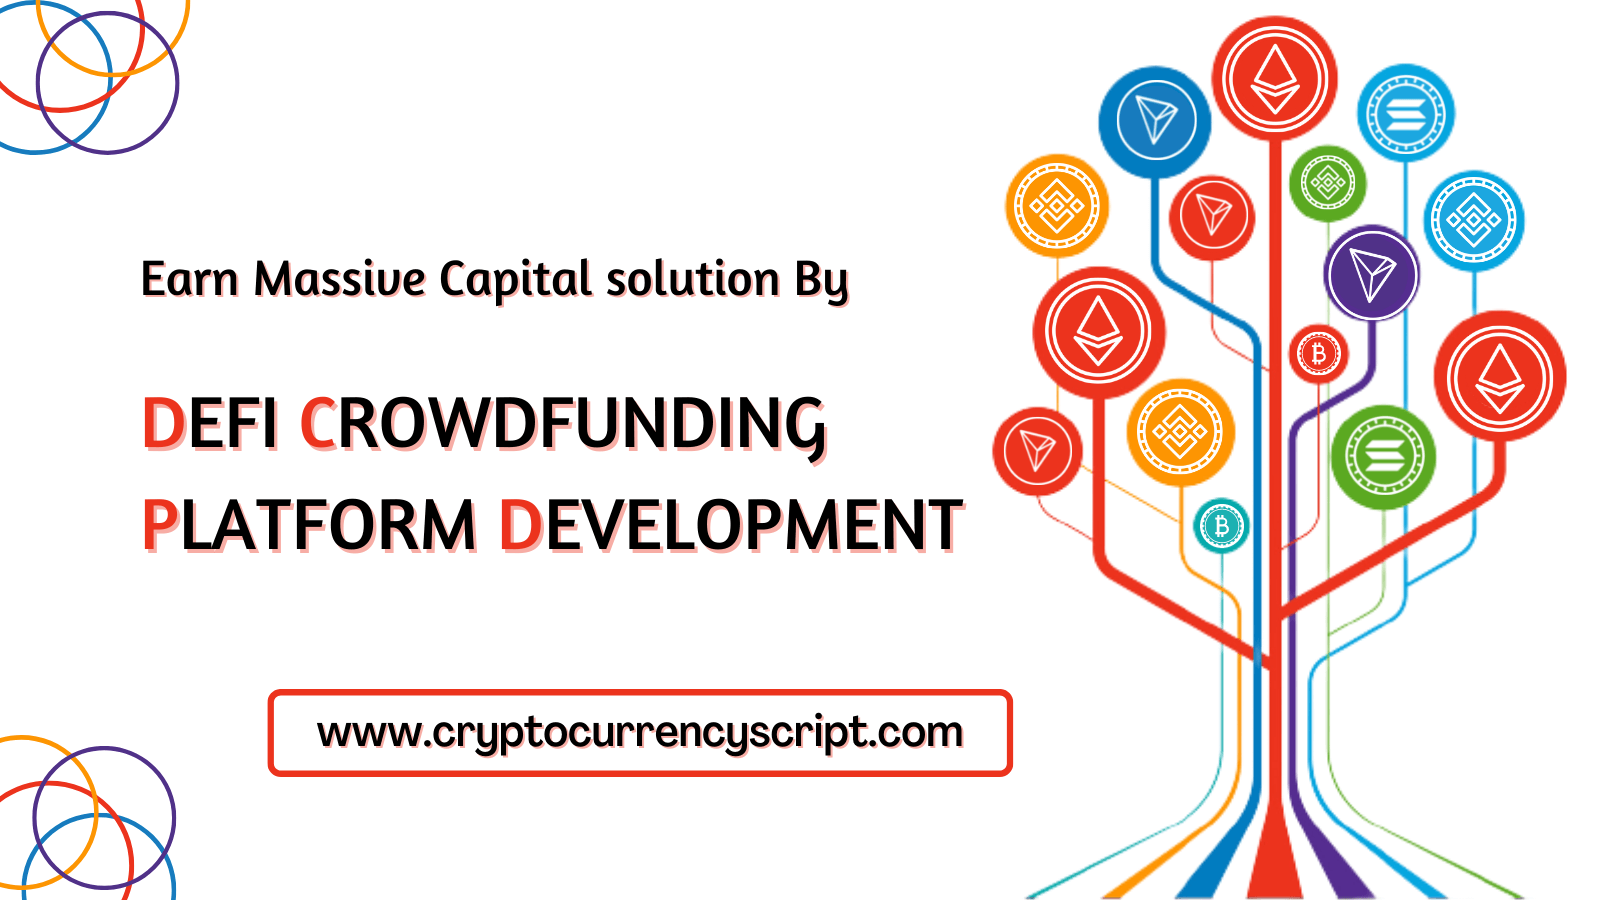 Earn Massive Capital solution By Launching A DeFi Crowdfunding Platform